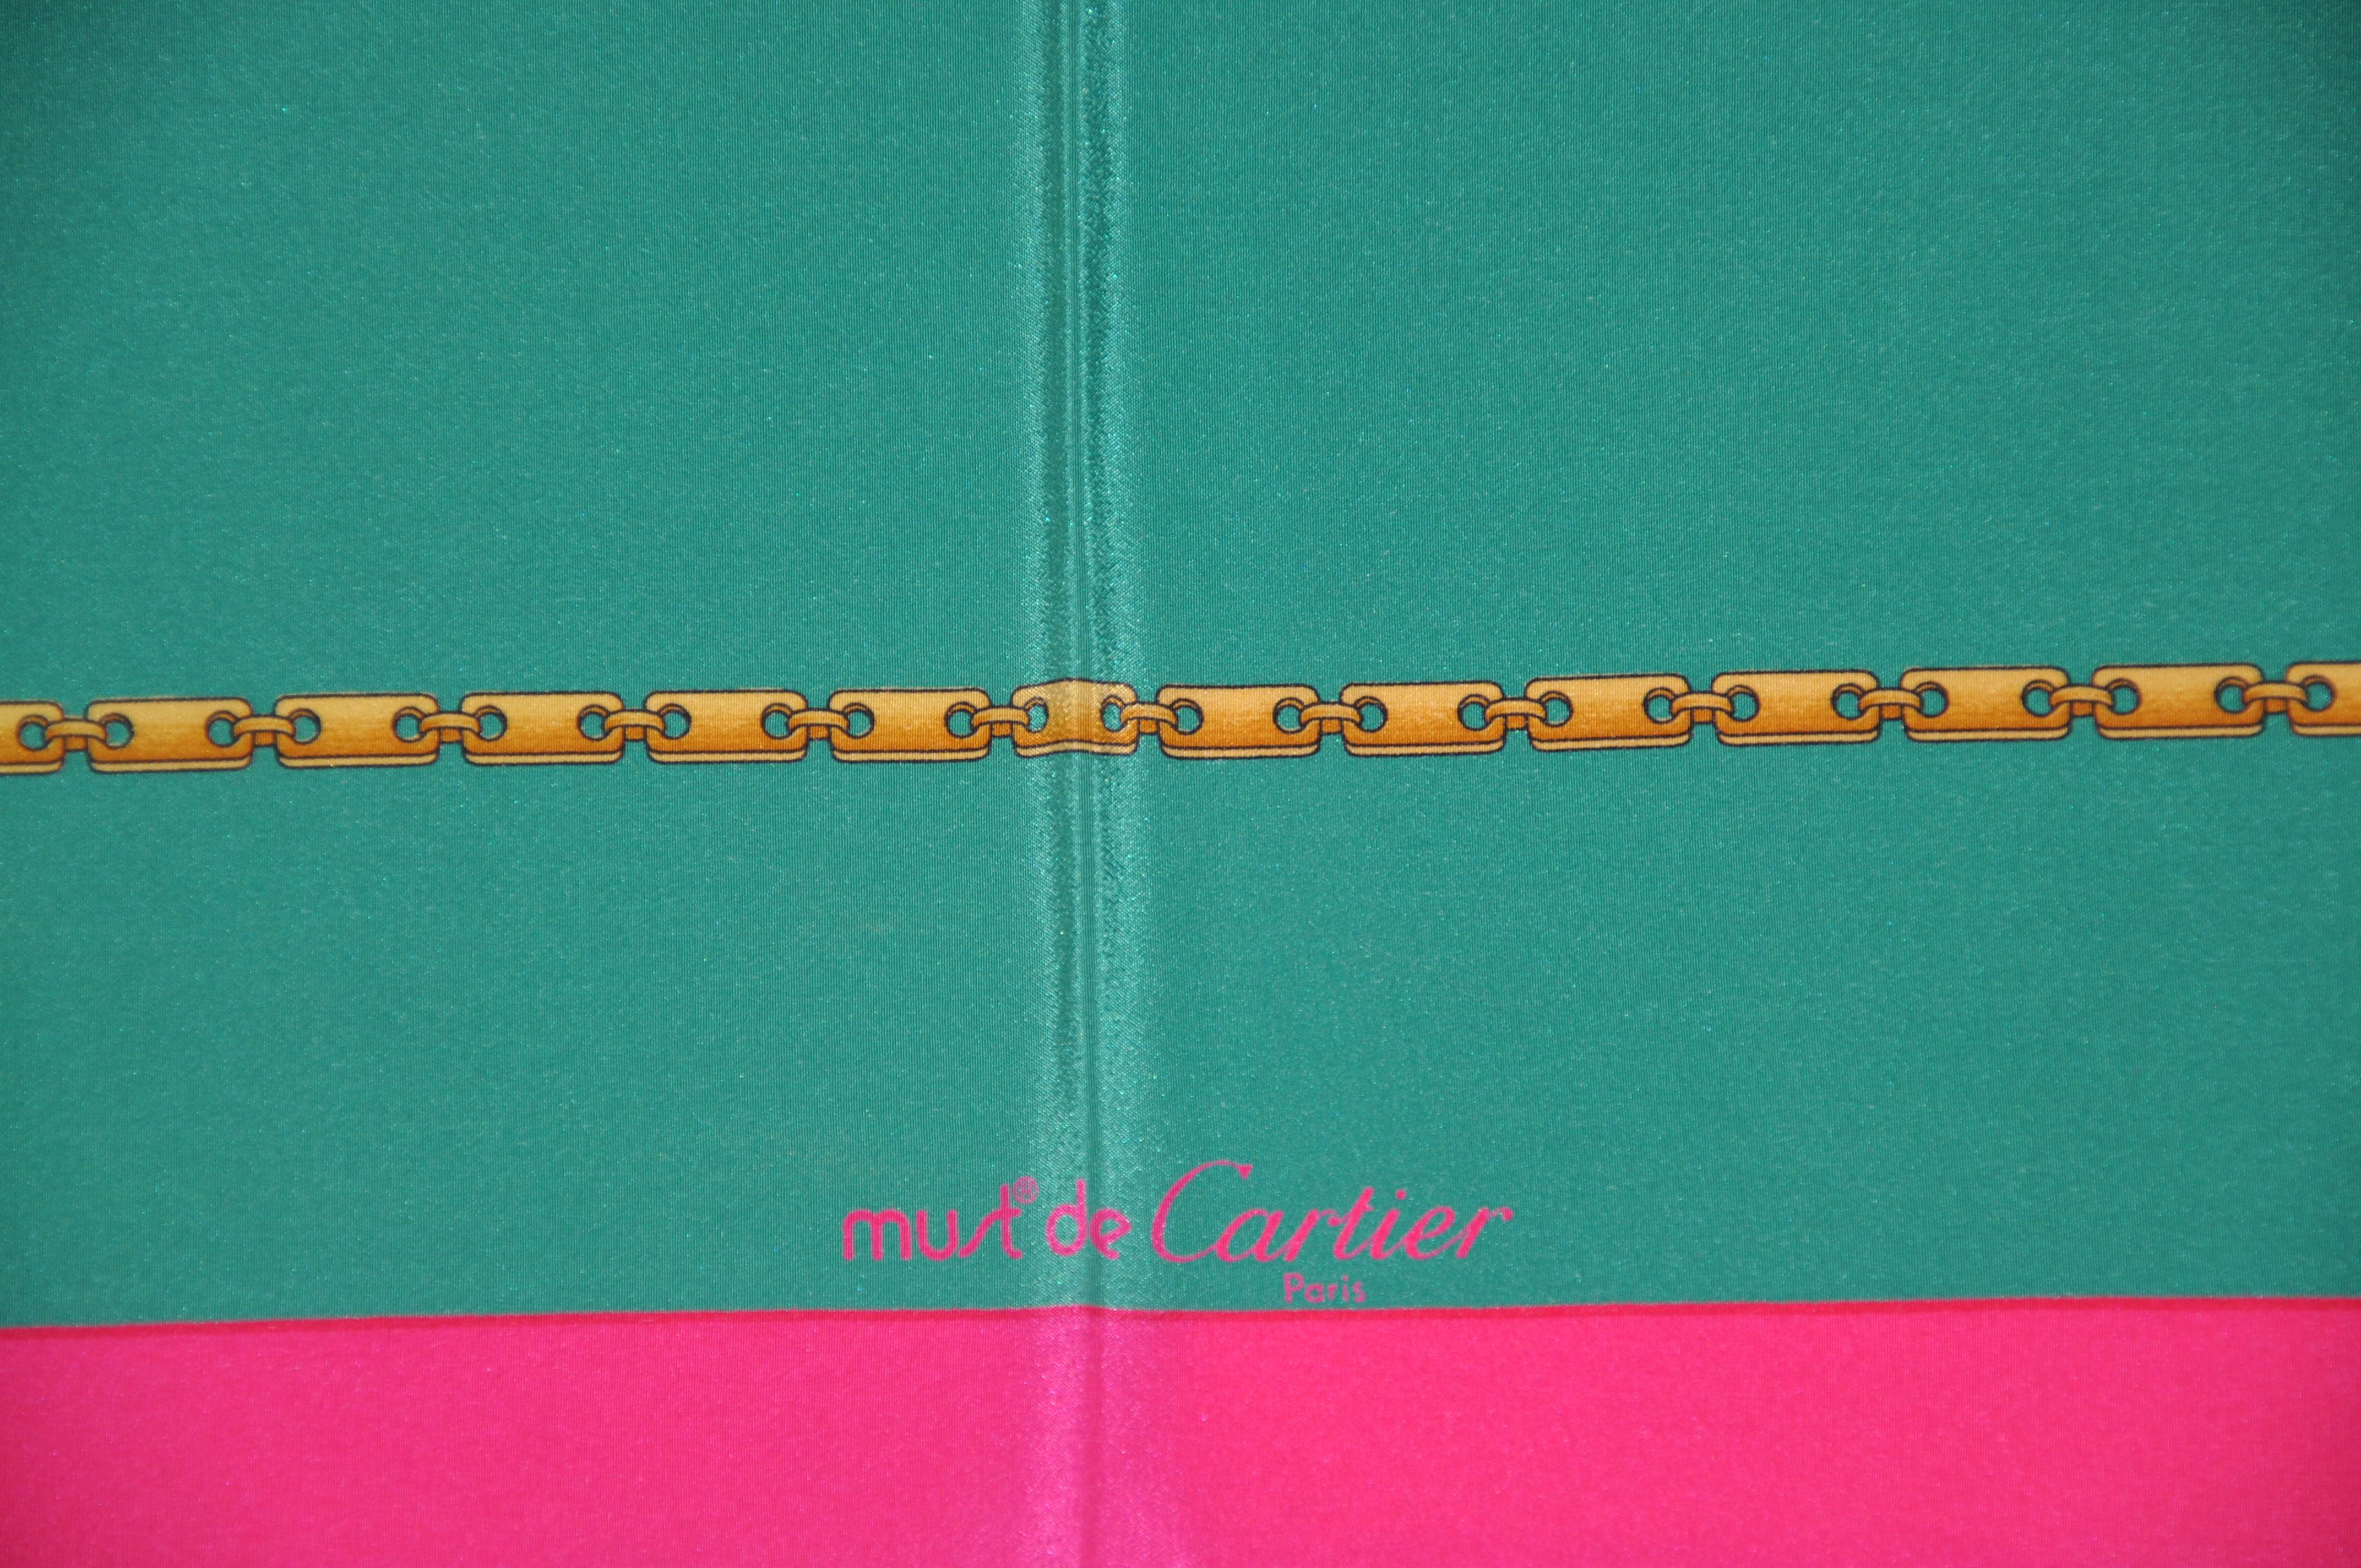     Cartier's Rich neon fuchsia borders surrounding aqua-green chain-link silk crepe di chine scarf accented with hand-rolled edges, measures 32 inches by 33 inches. Made in France.